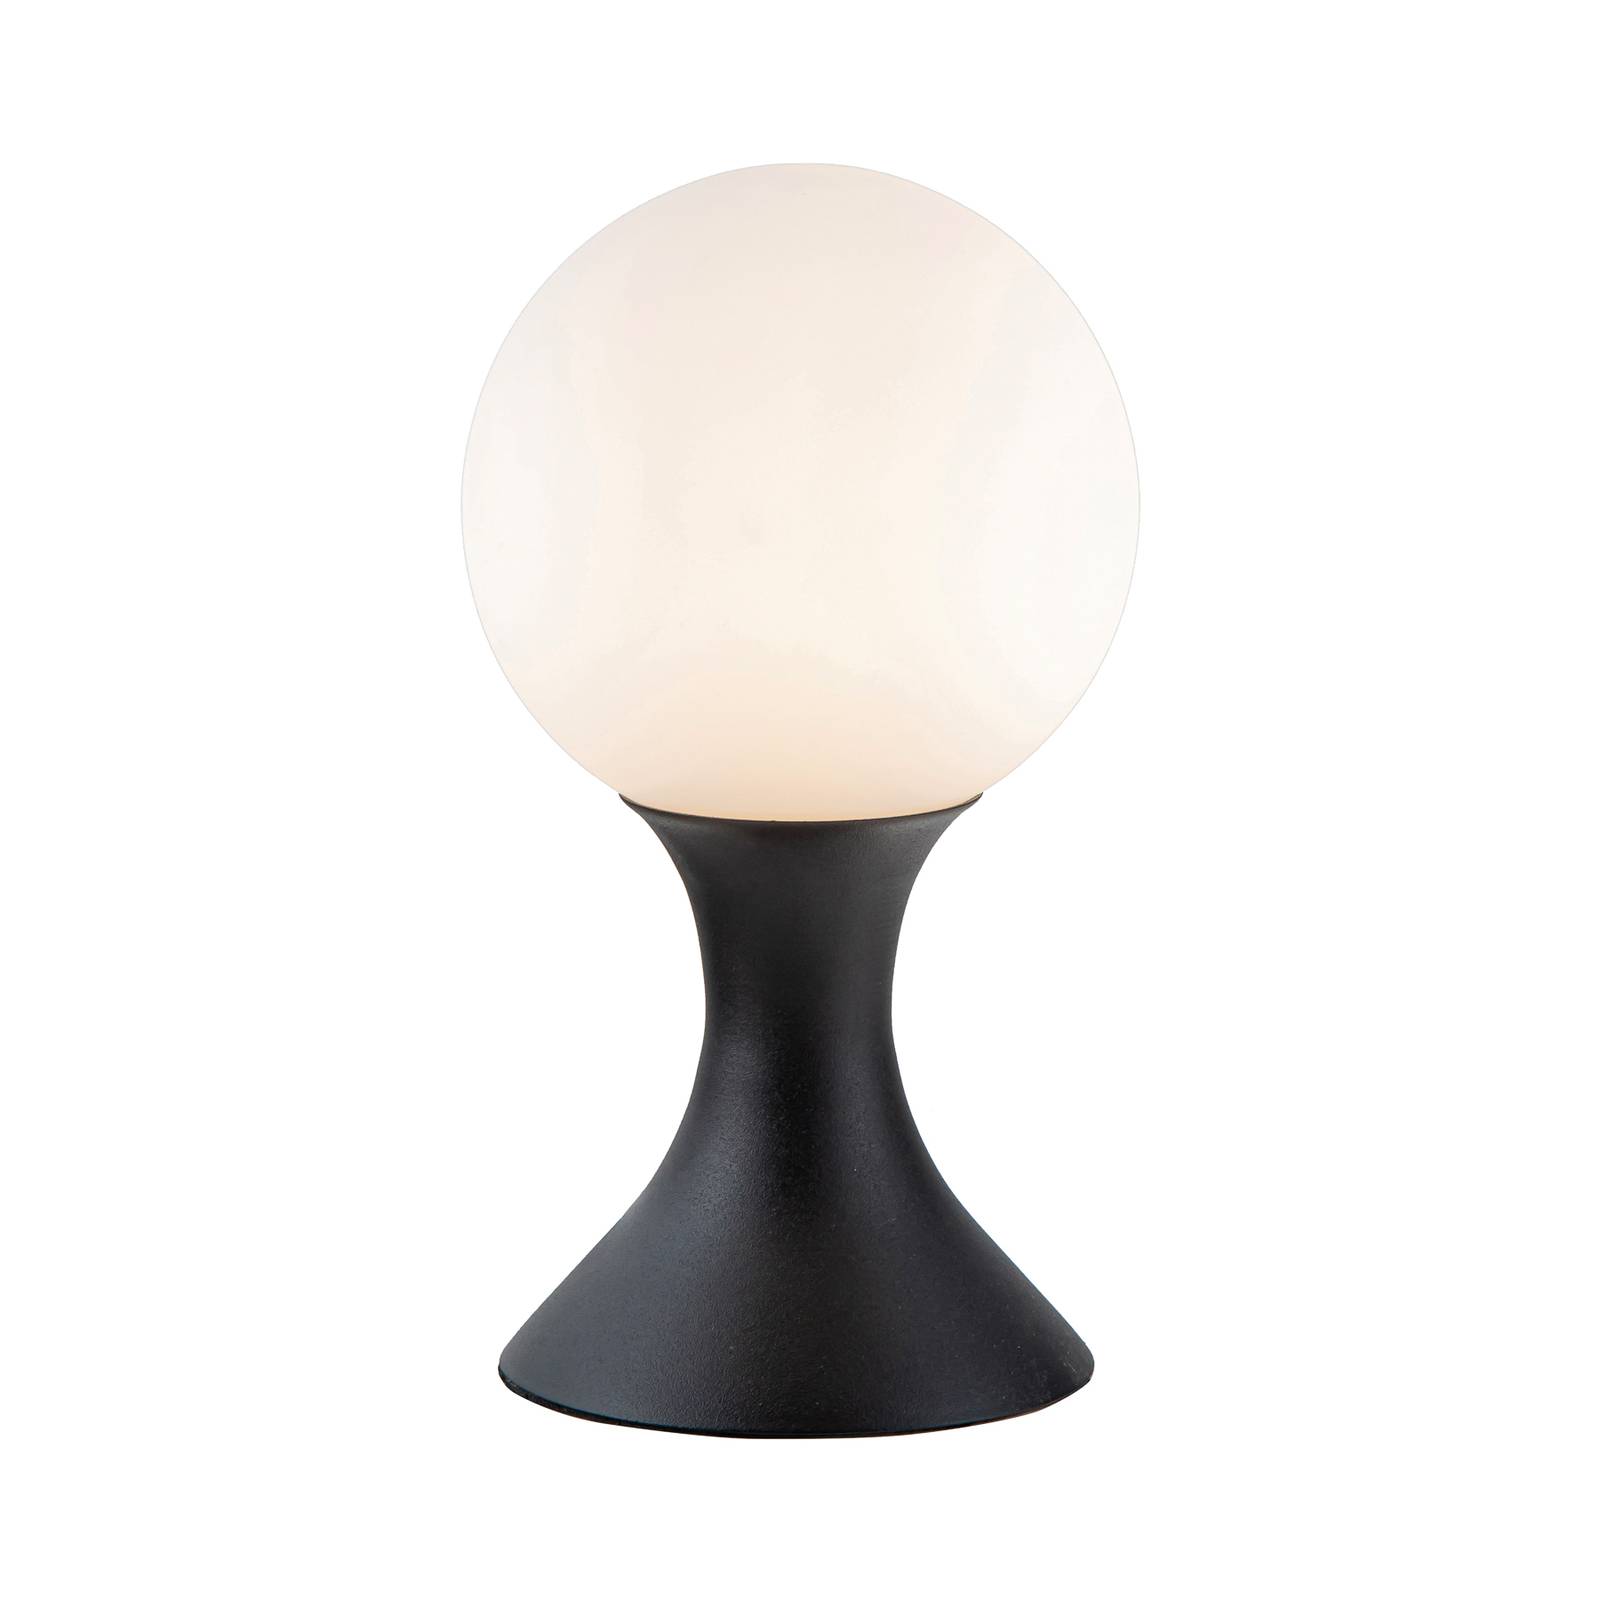 Lucide Moya table lamp, glass lampshade, black